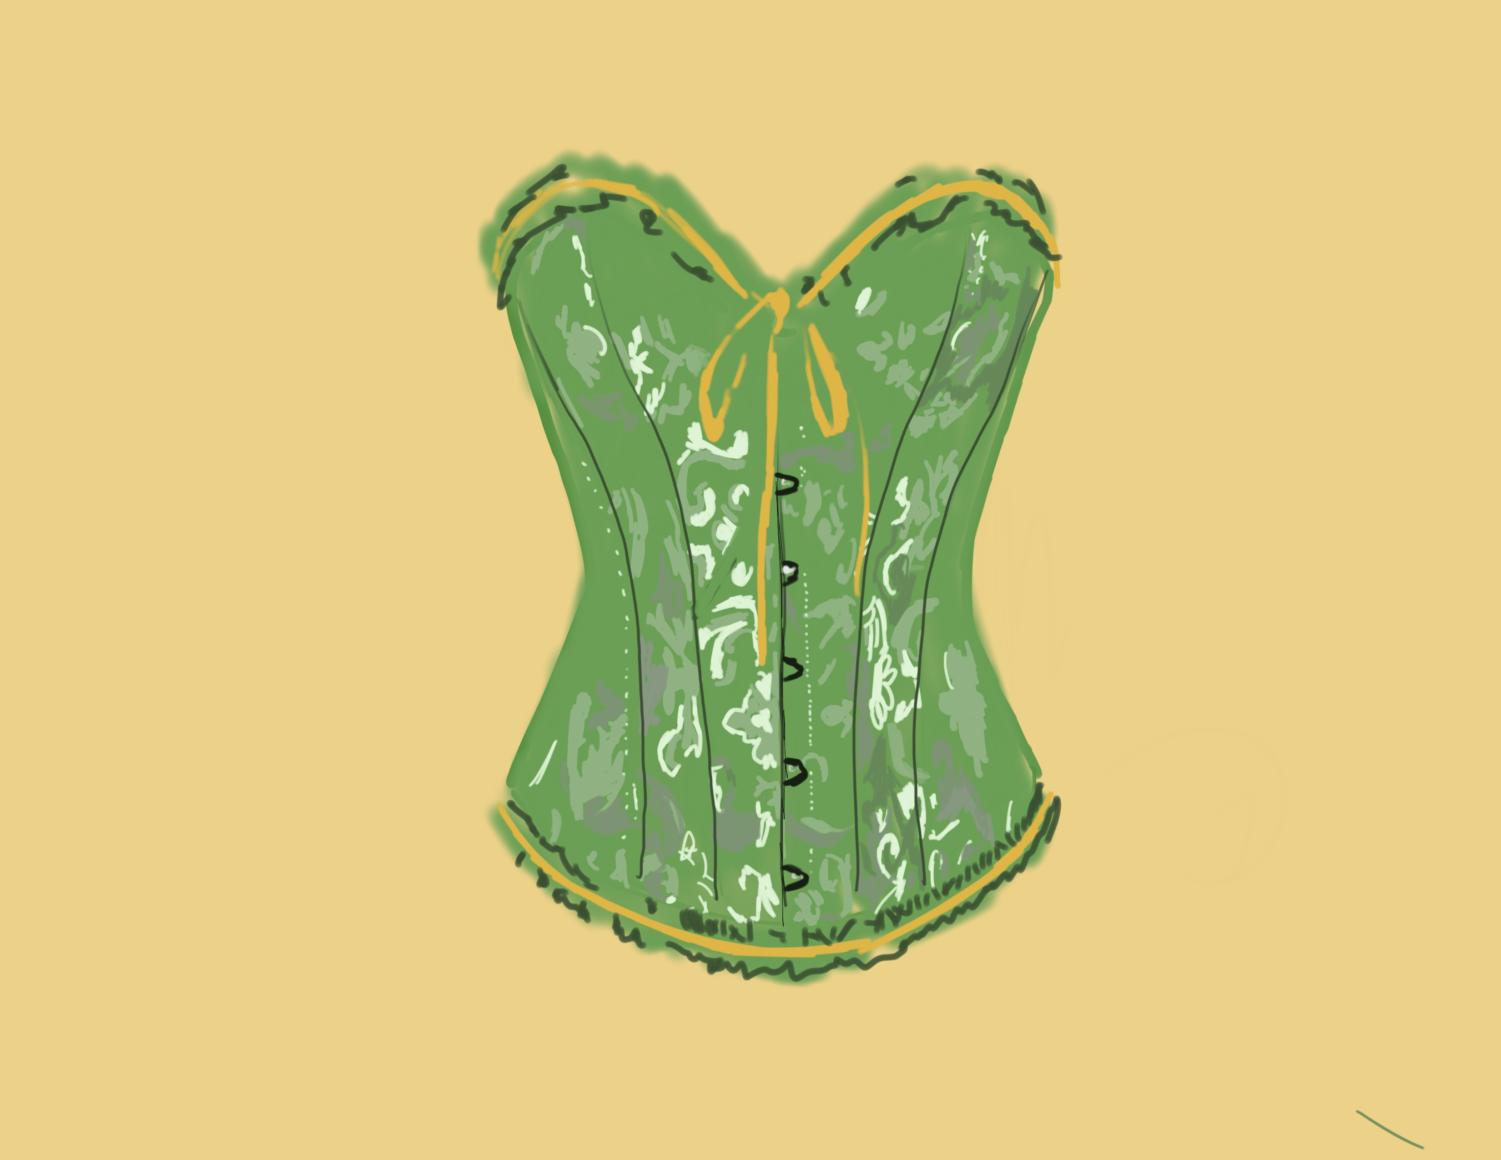 What do girls think about wearing a corset? Would you wear one